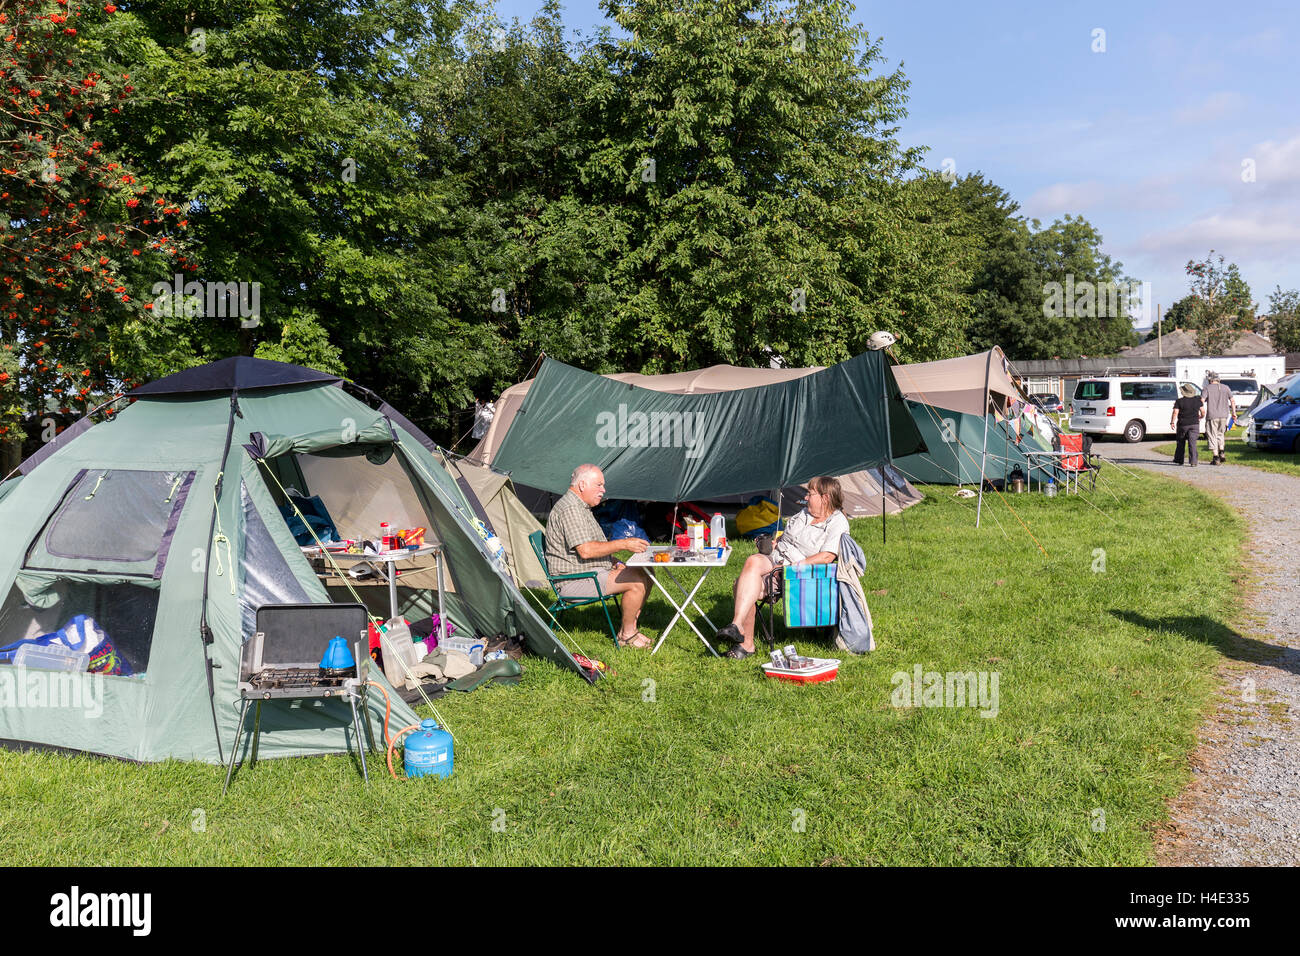 Tents on campsite, Yorkshire Dales, UK Stock Photo